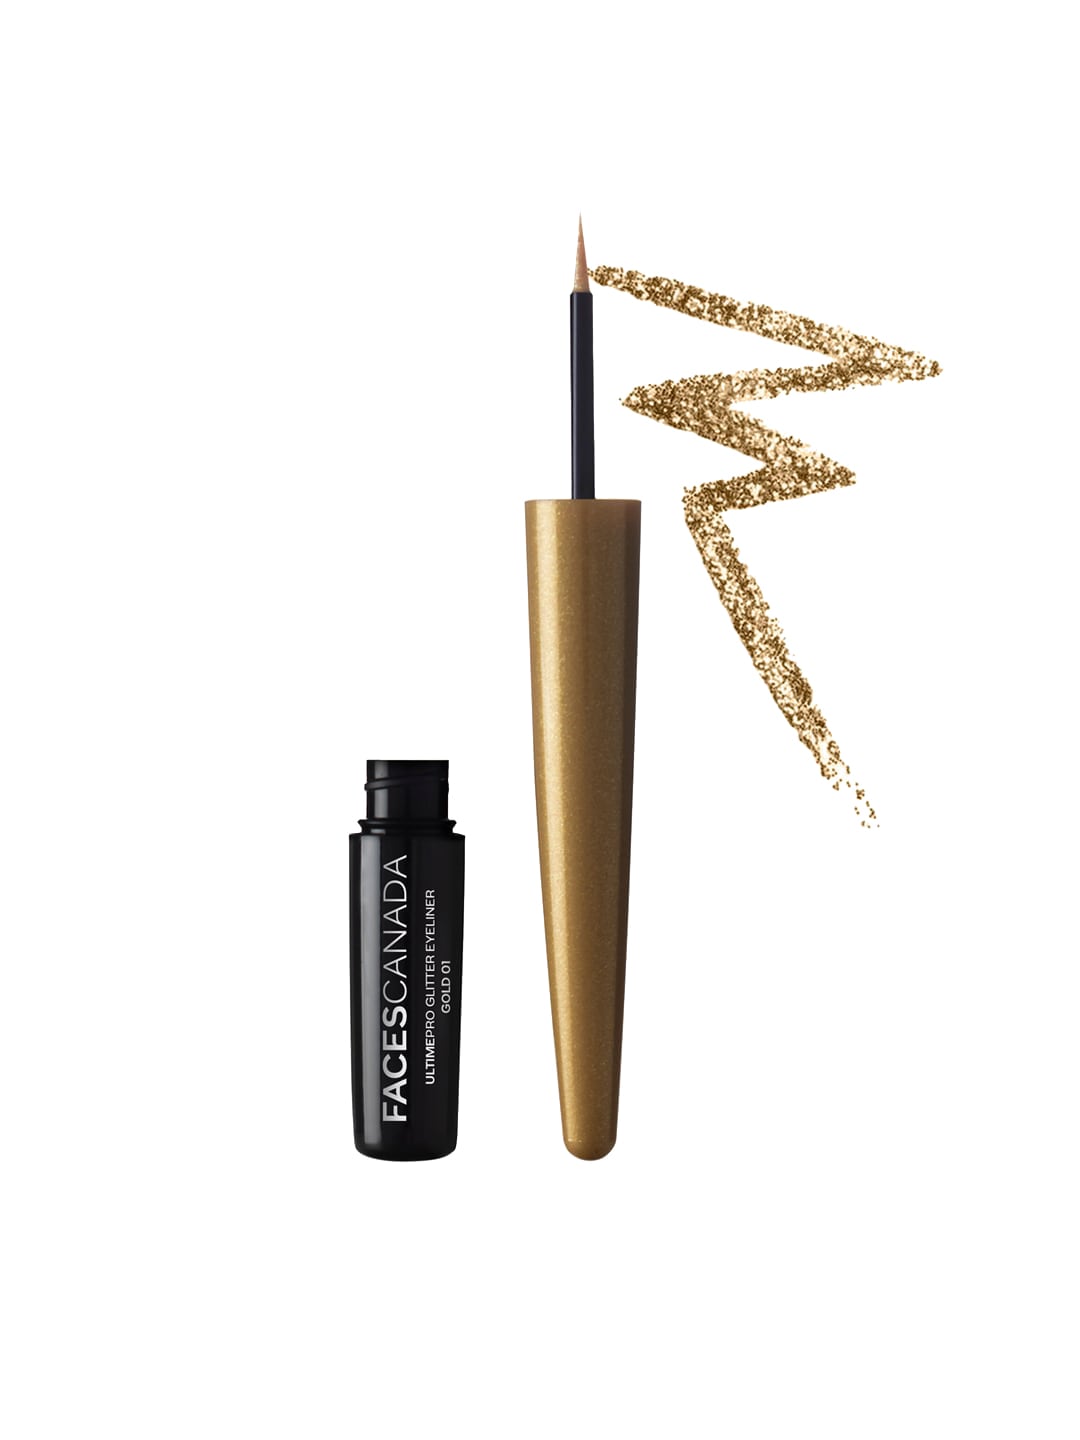 FACES CANADA Ultime Pro Glitter Eyeliner Gold 01 - 1.7ml Price in India